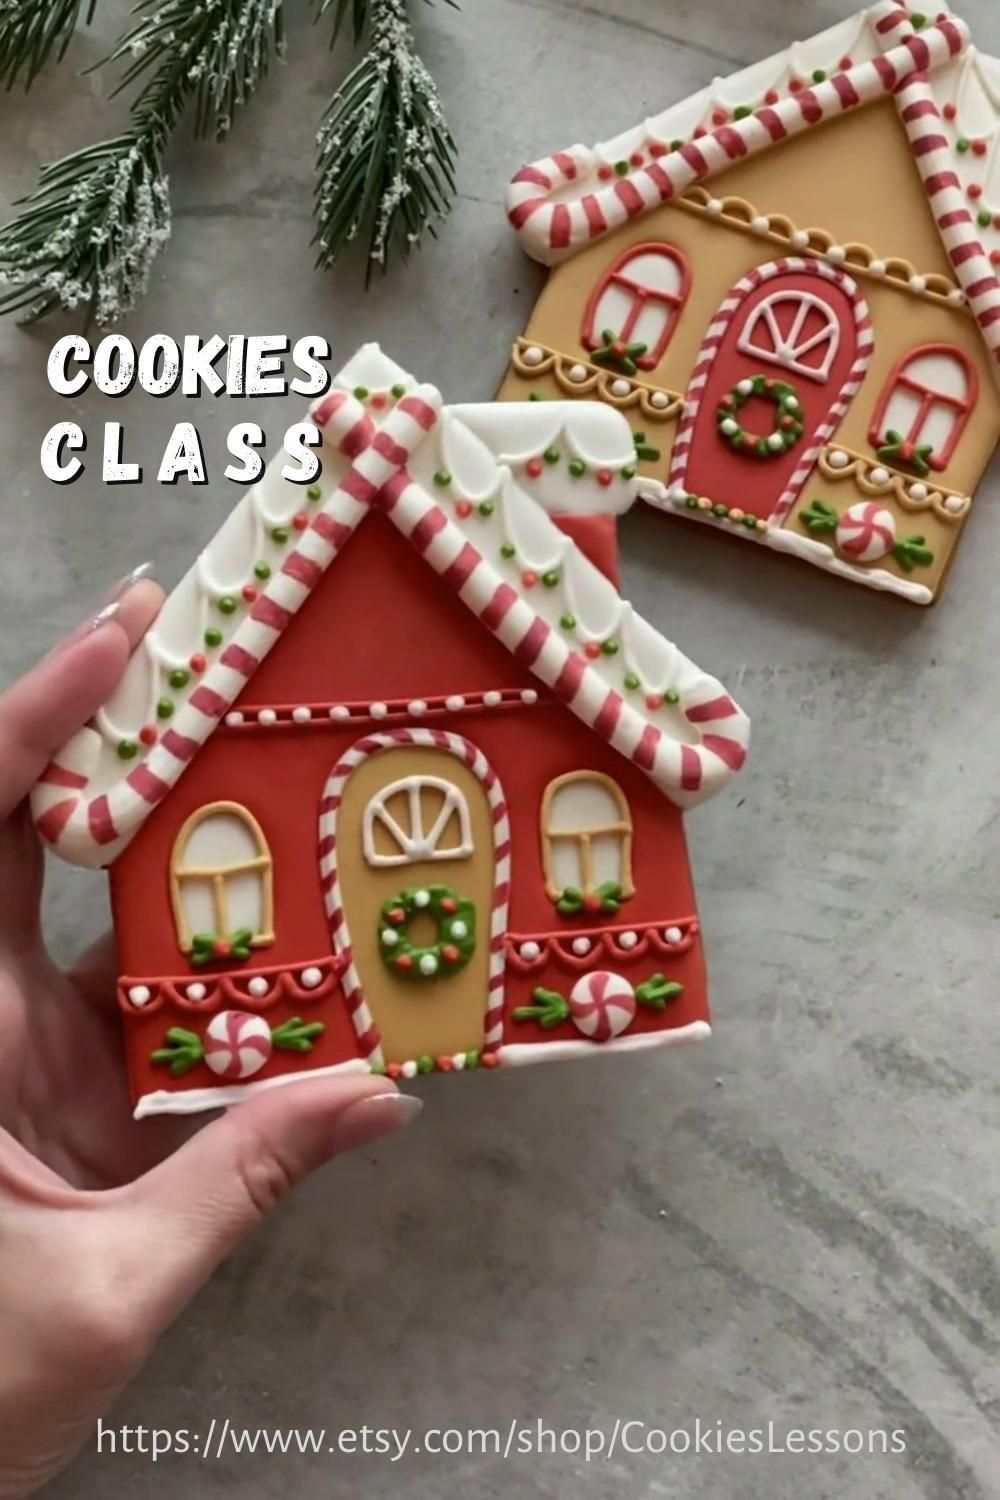 Cookies class - Christmas houses - Cookies class - Christmas houses -   18 ginger bread house decorations christmas gingerbread ideas